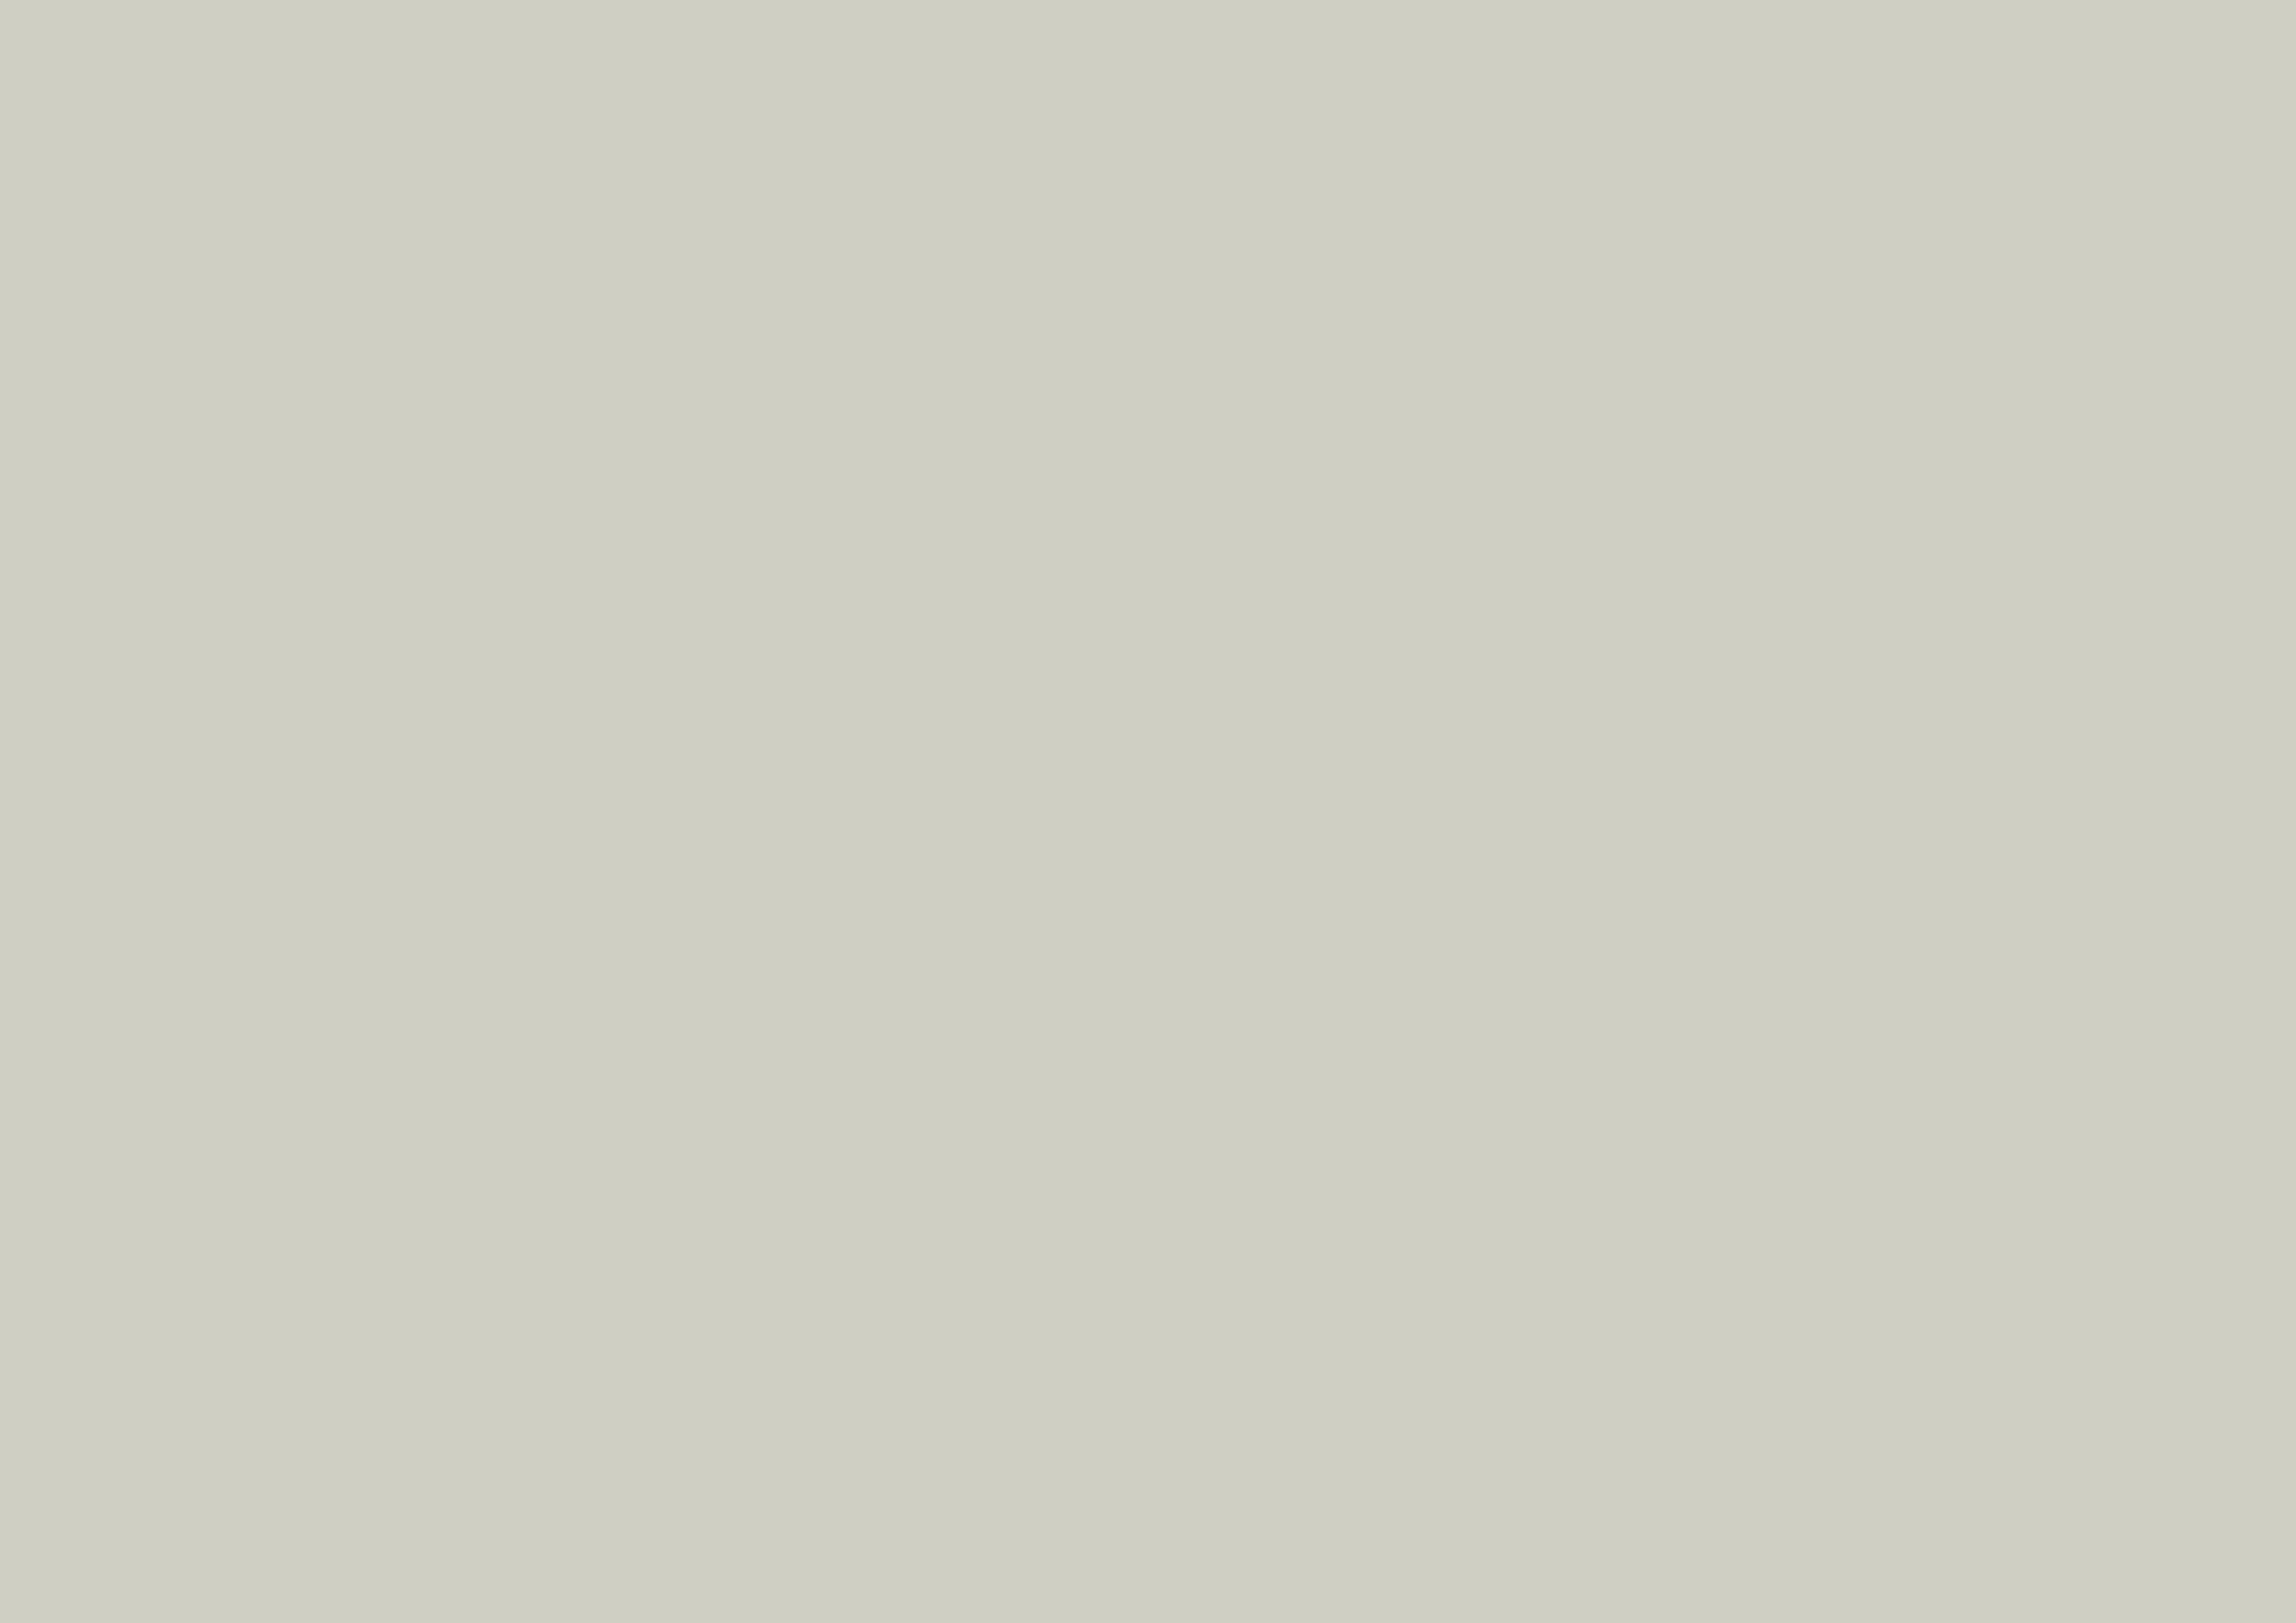 3508x2480 Pastel Gray Solid Color Background